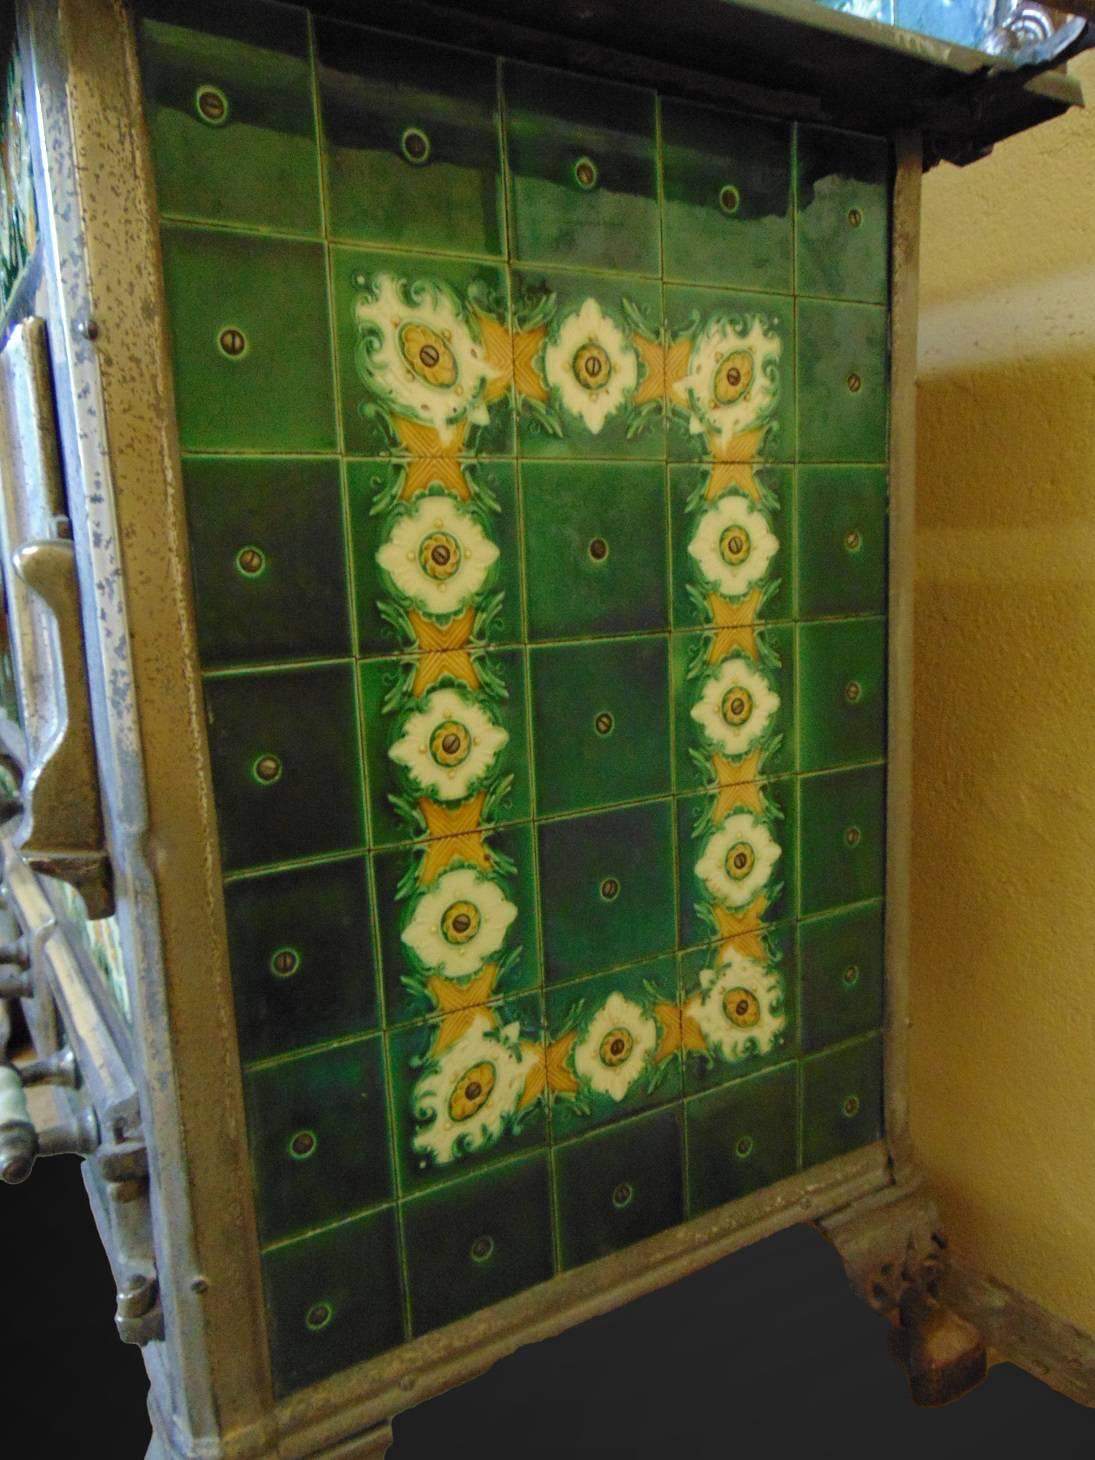 19th Century Range Cooker Tiled with Matching Coal Scuttle, circa 1900